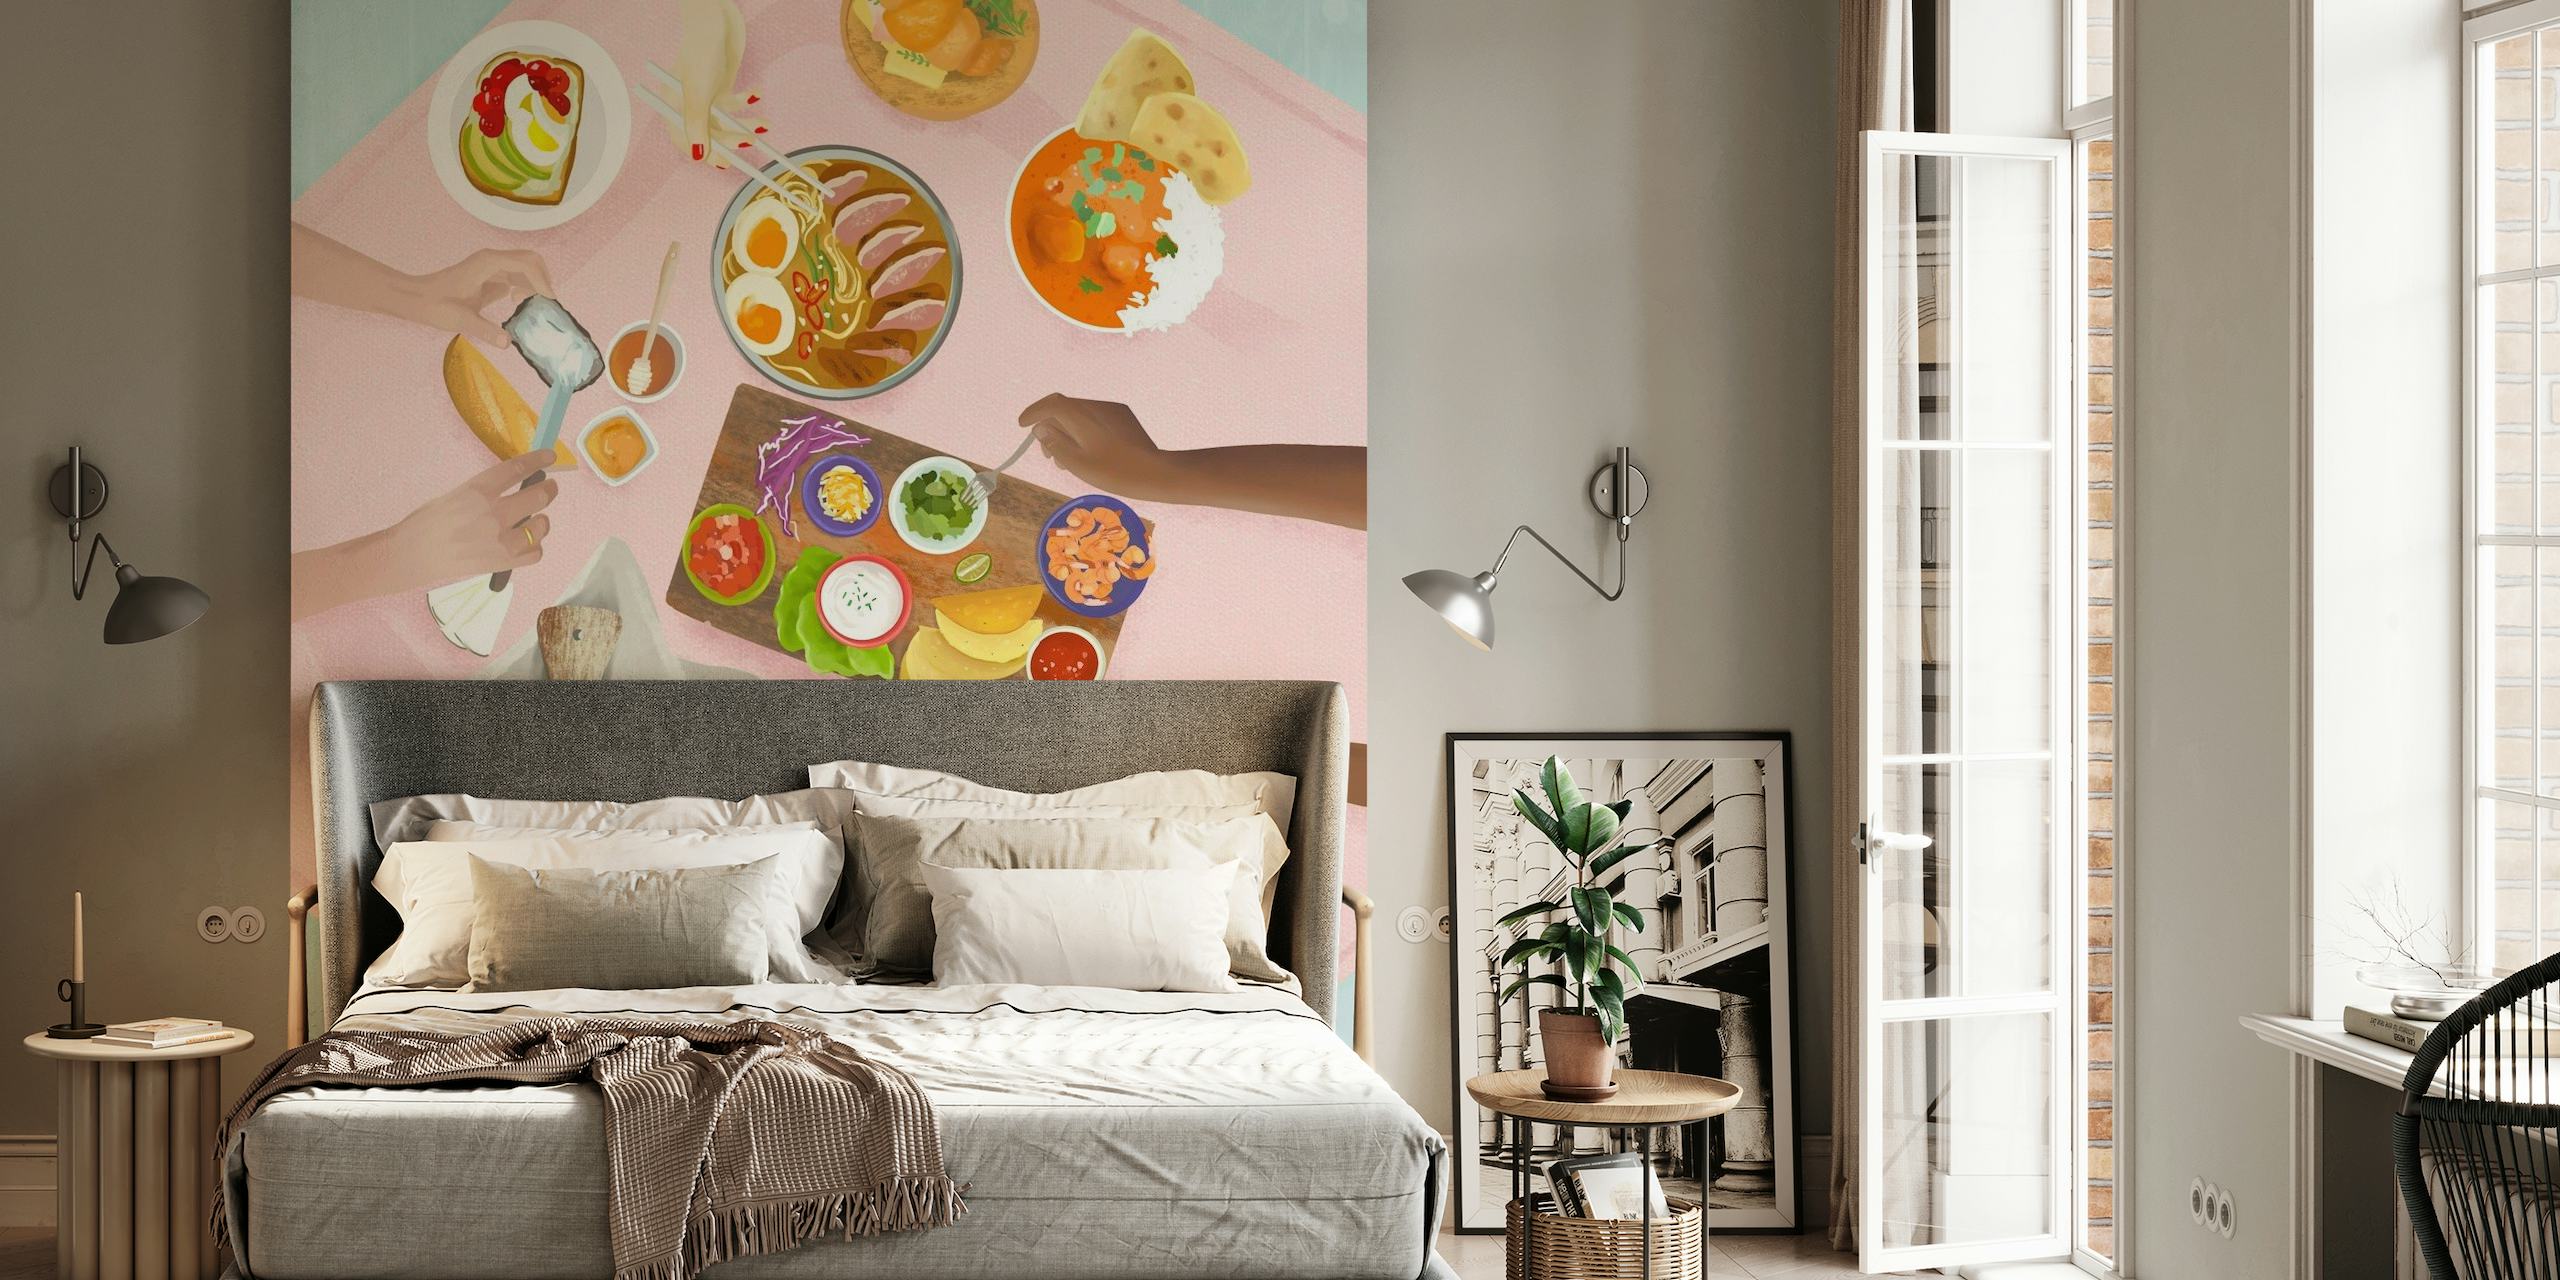 Illustrated brunch-themed wall mural with overhead view of dining table set with various dishes and flowers